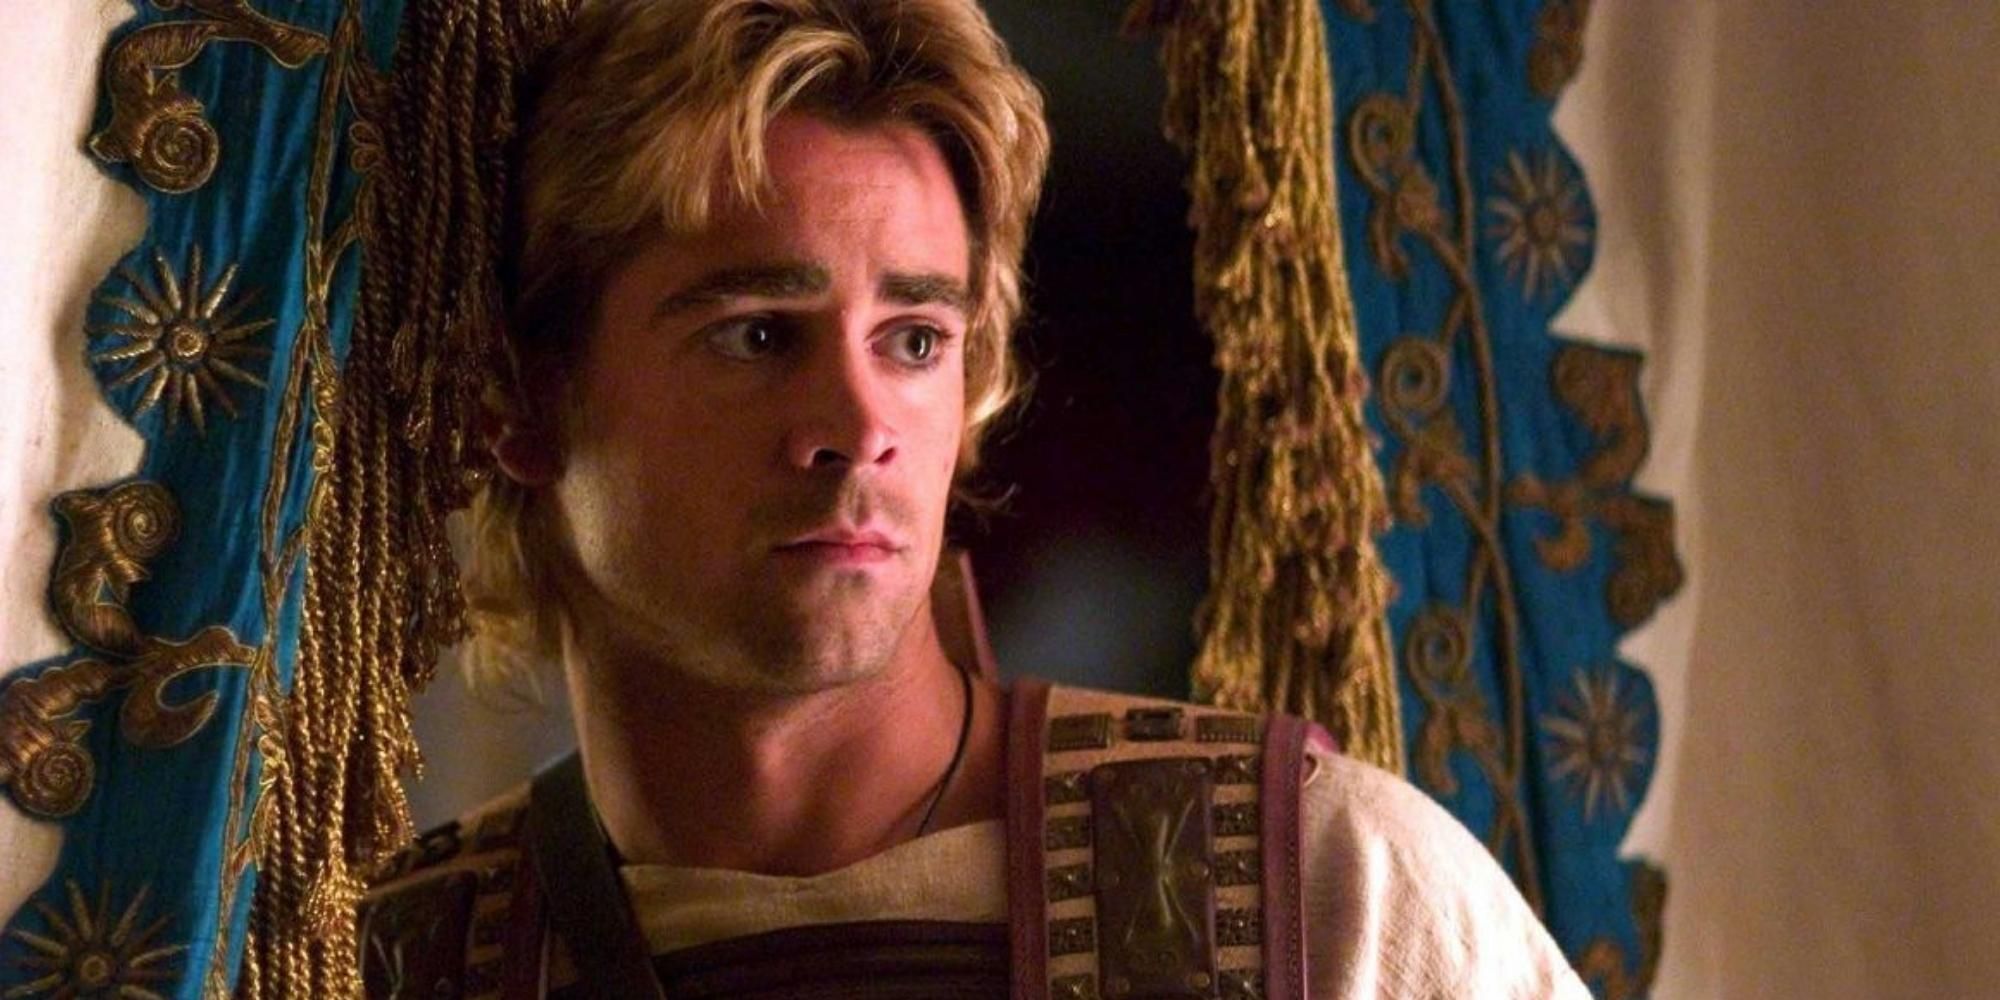 Colin Farrell as Alexander the Great in Alexander looking at something